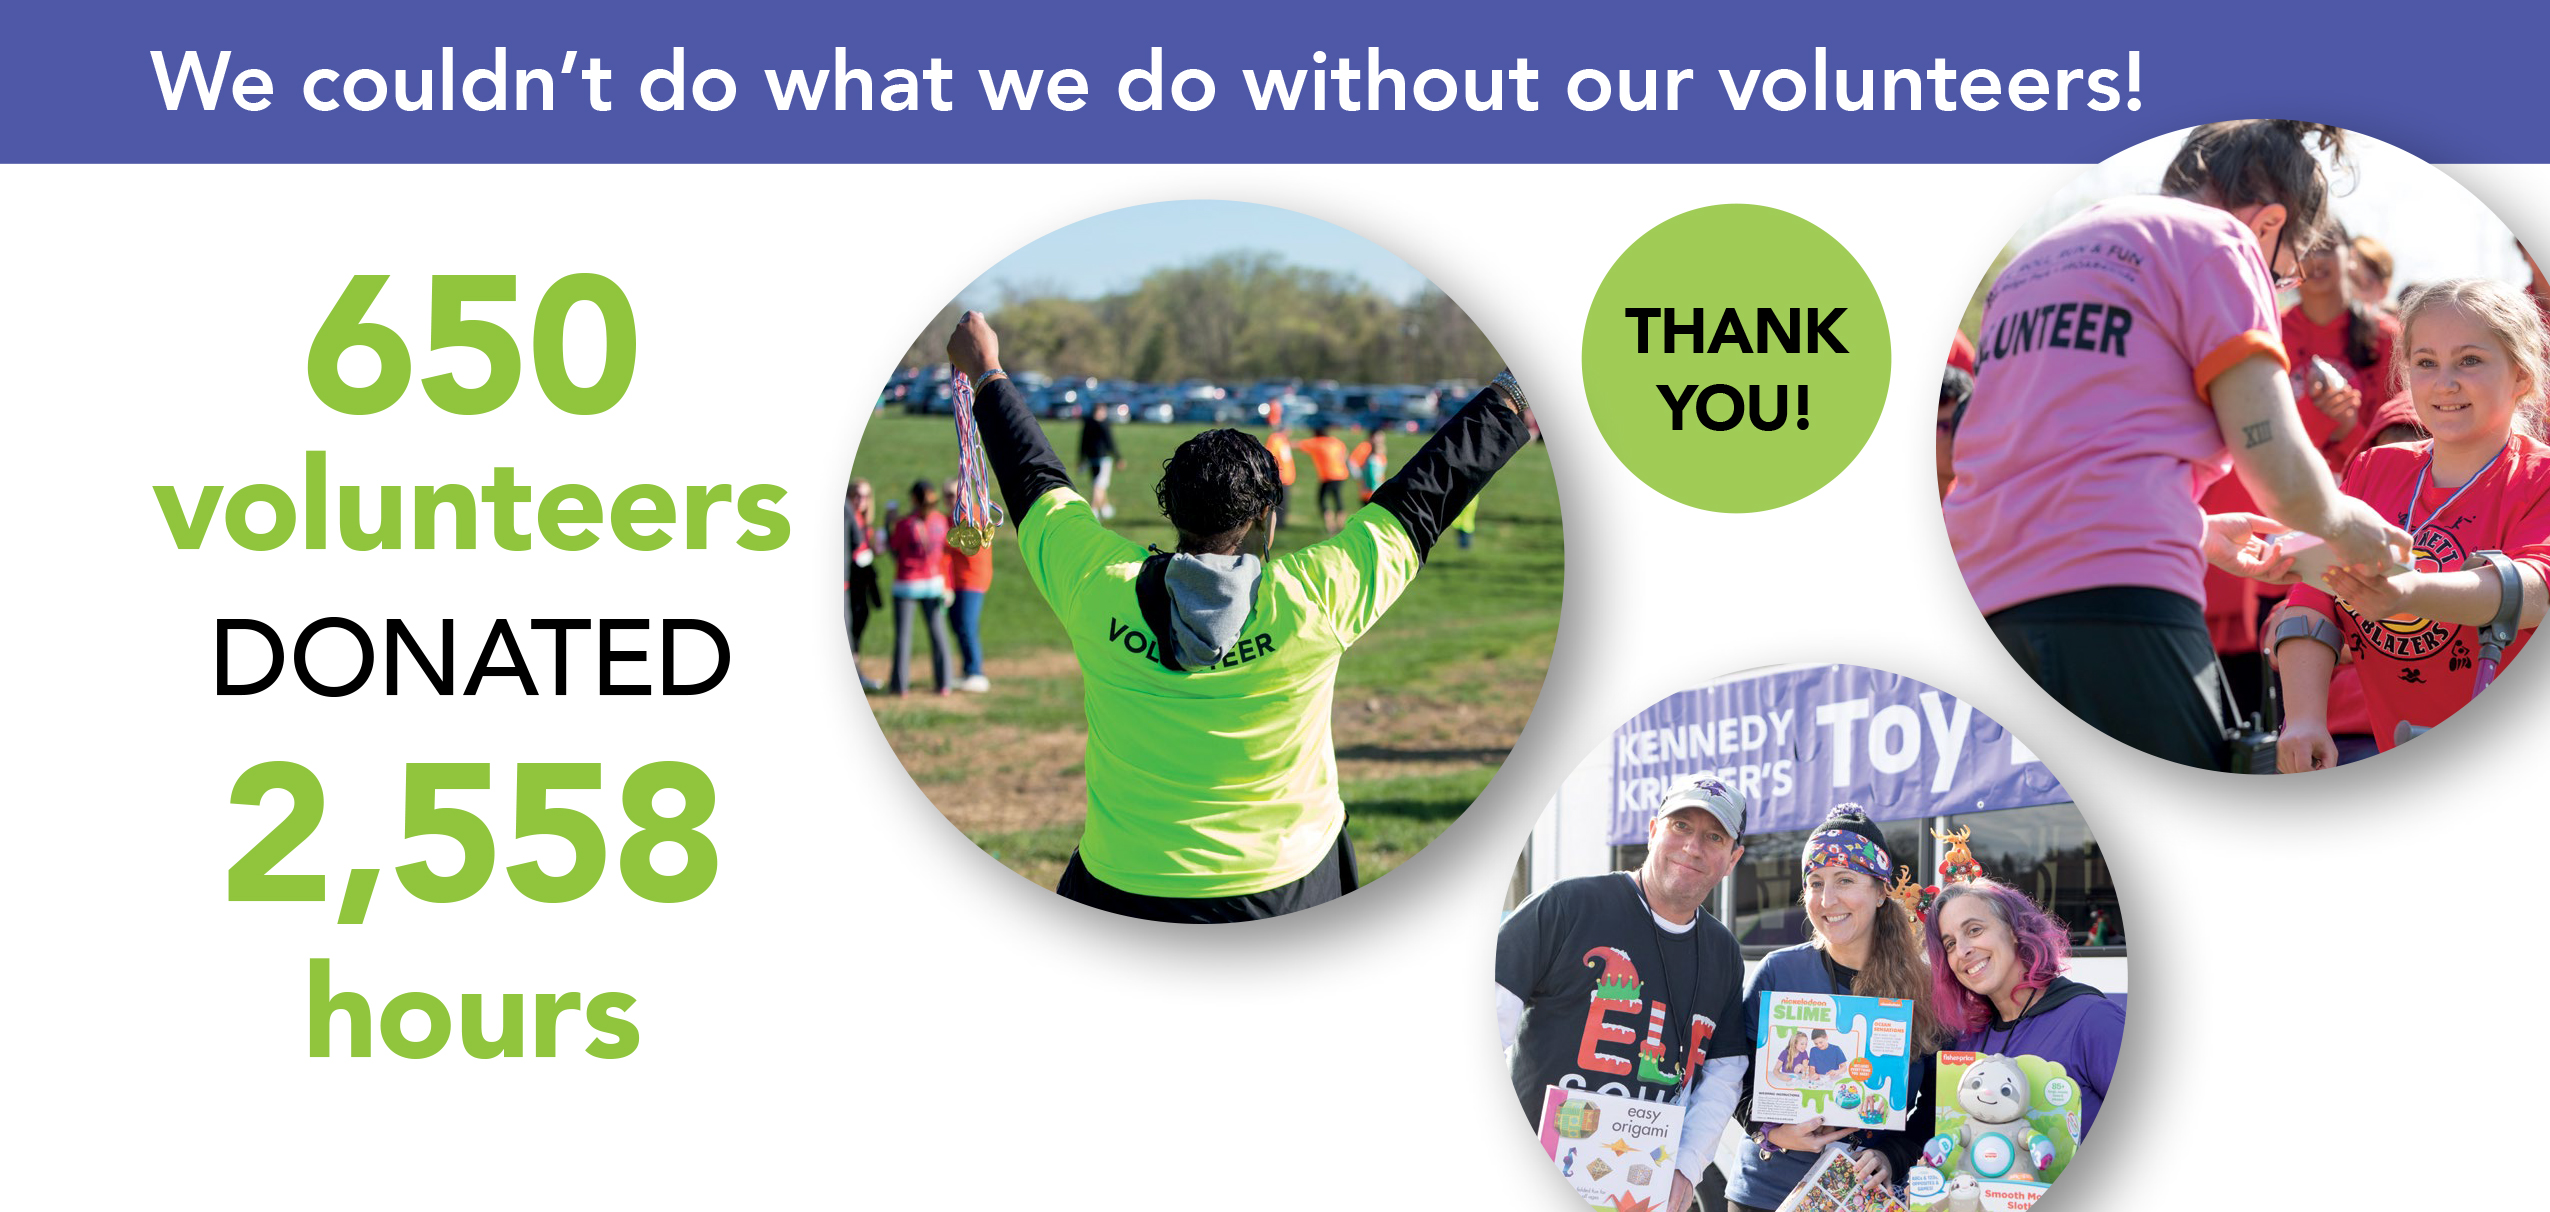 Infographic showing how volunteers helped Kennedy Krieger in 2022: 605 volunteers donated 2,558 hours. The infographic says: “We couldn’t do what we do without our volunteers! Thank you!”